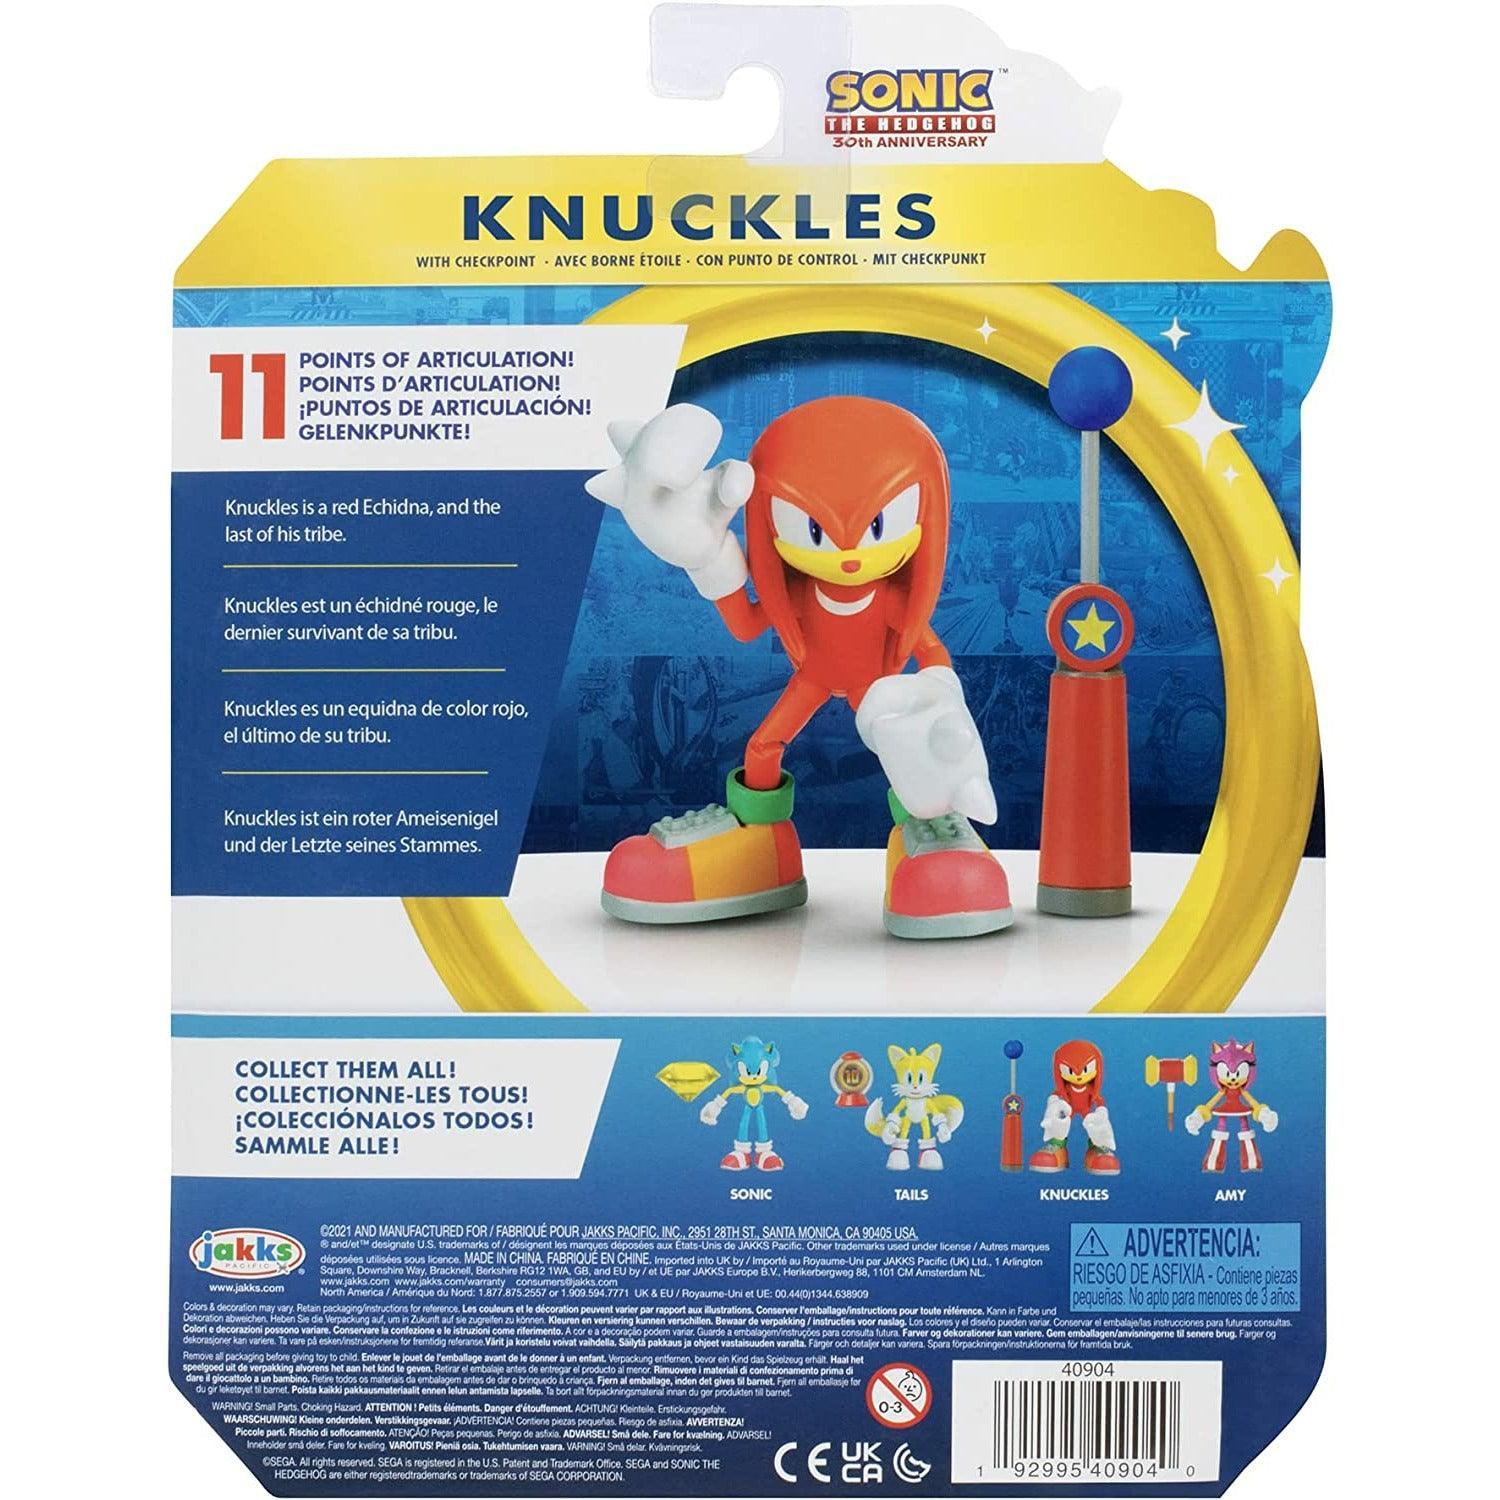 Sonic The Hedgehog 4-Inch Action Figure Modern Knuckles with Blue Checkpoint Collectible Toy - BumbleToys - 5-7 Years, 8-13 Years, Boys, OXE, Pre-Order, Sonic